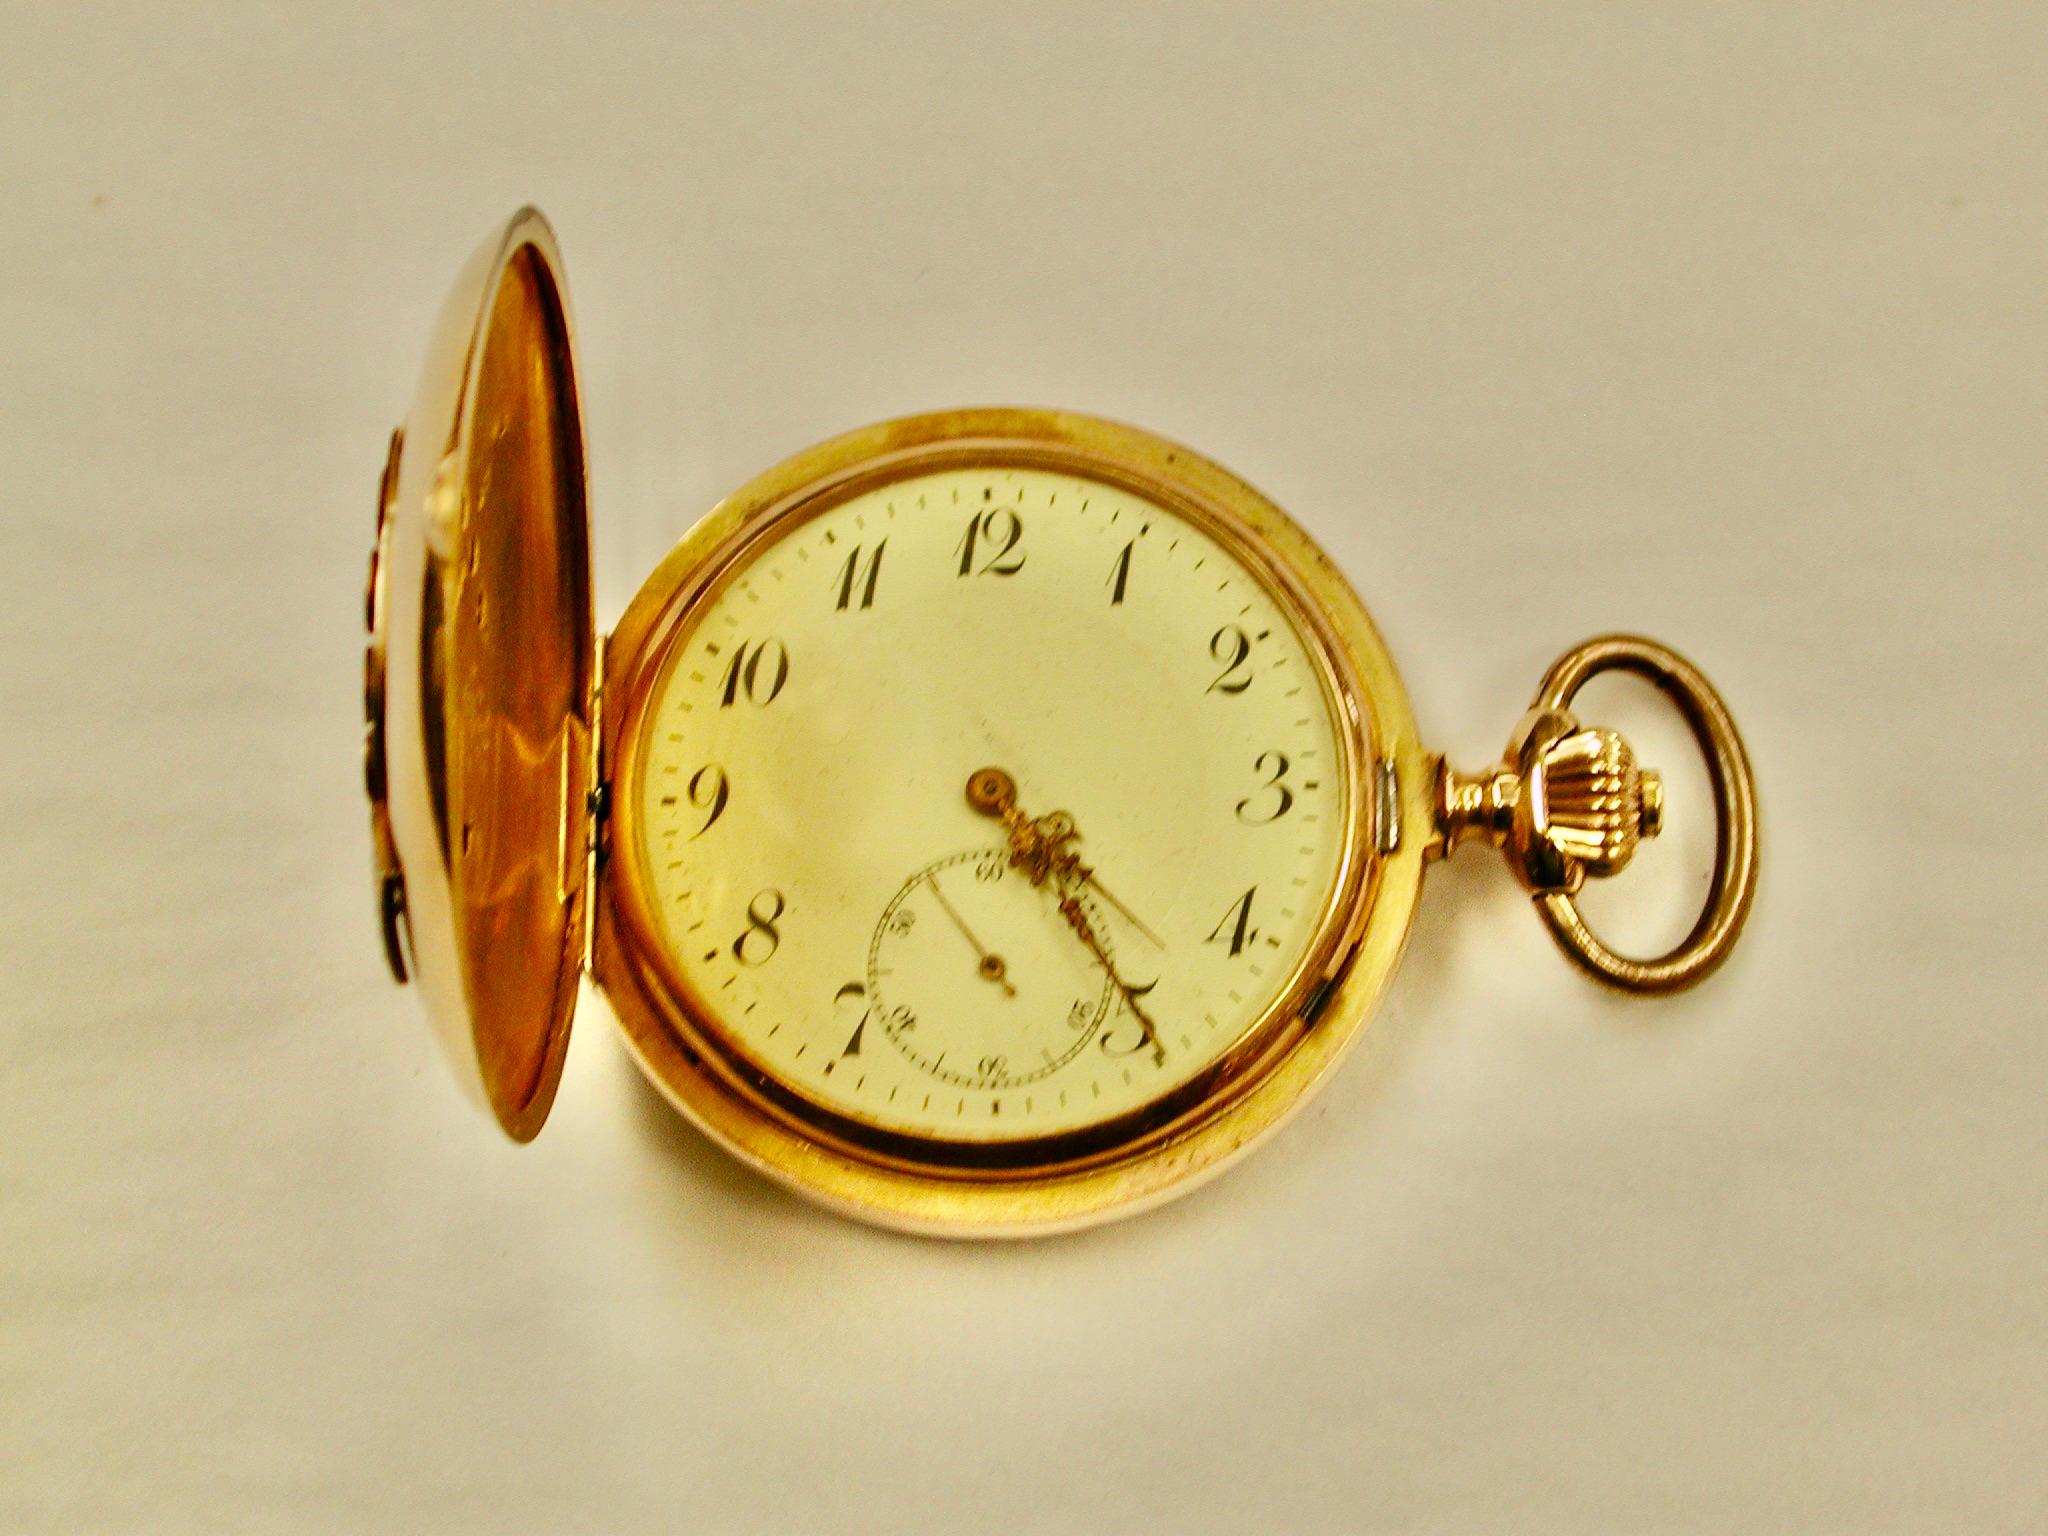 14ct Swiss Gold Hunter Watch,Whip & Horseshoe,Diamonds and Rubies,c1890
Lovely Hunter Pocket watch set with graduated diamonds in the horeshoe and rubies in  the whip on 
the front.
The inside has a gold dust cover and underneath is the swiss